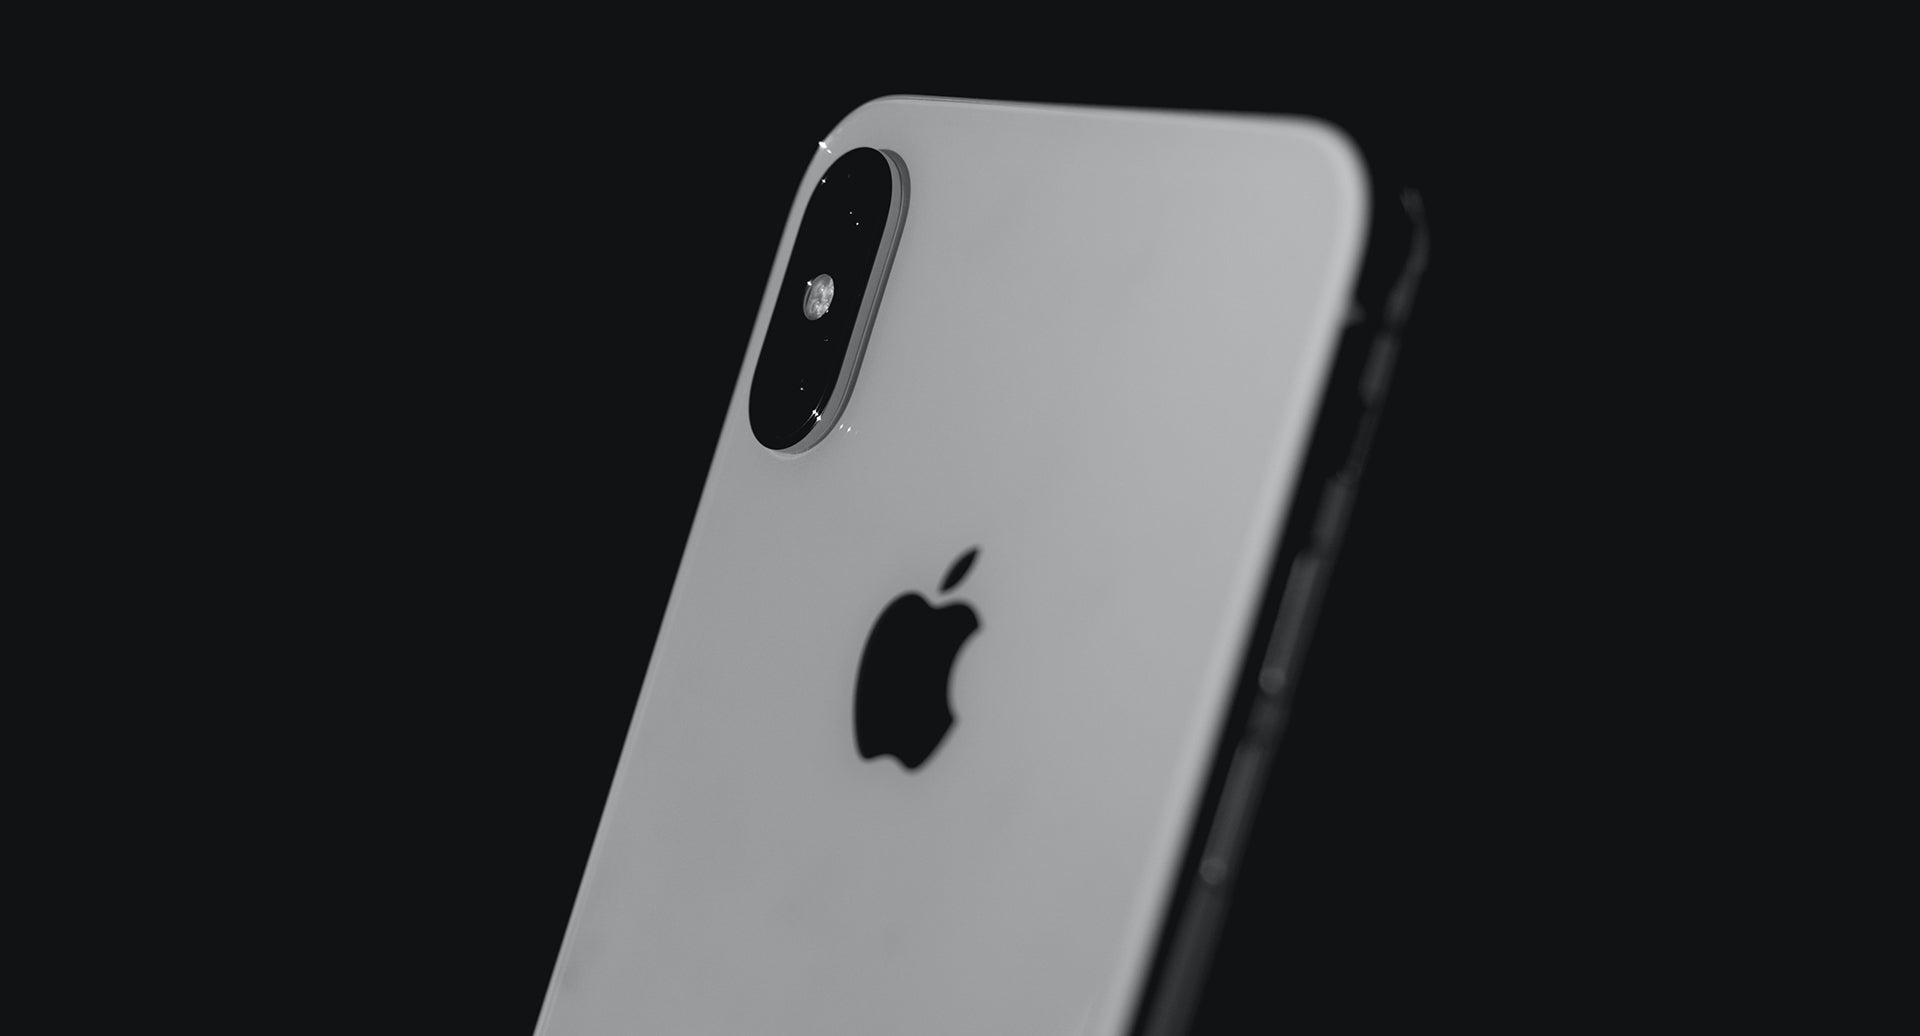 iPhone X Display Module Replacement Program for Touch Issues